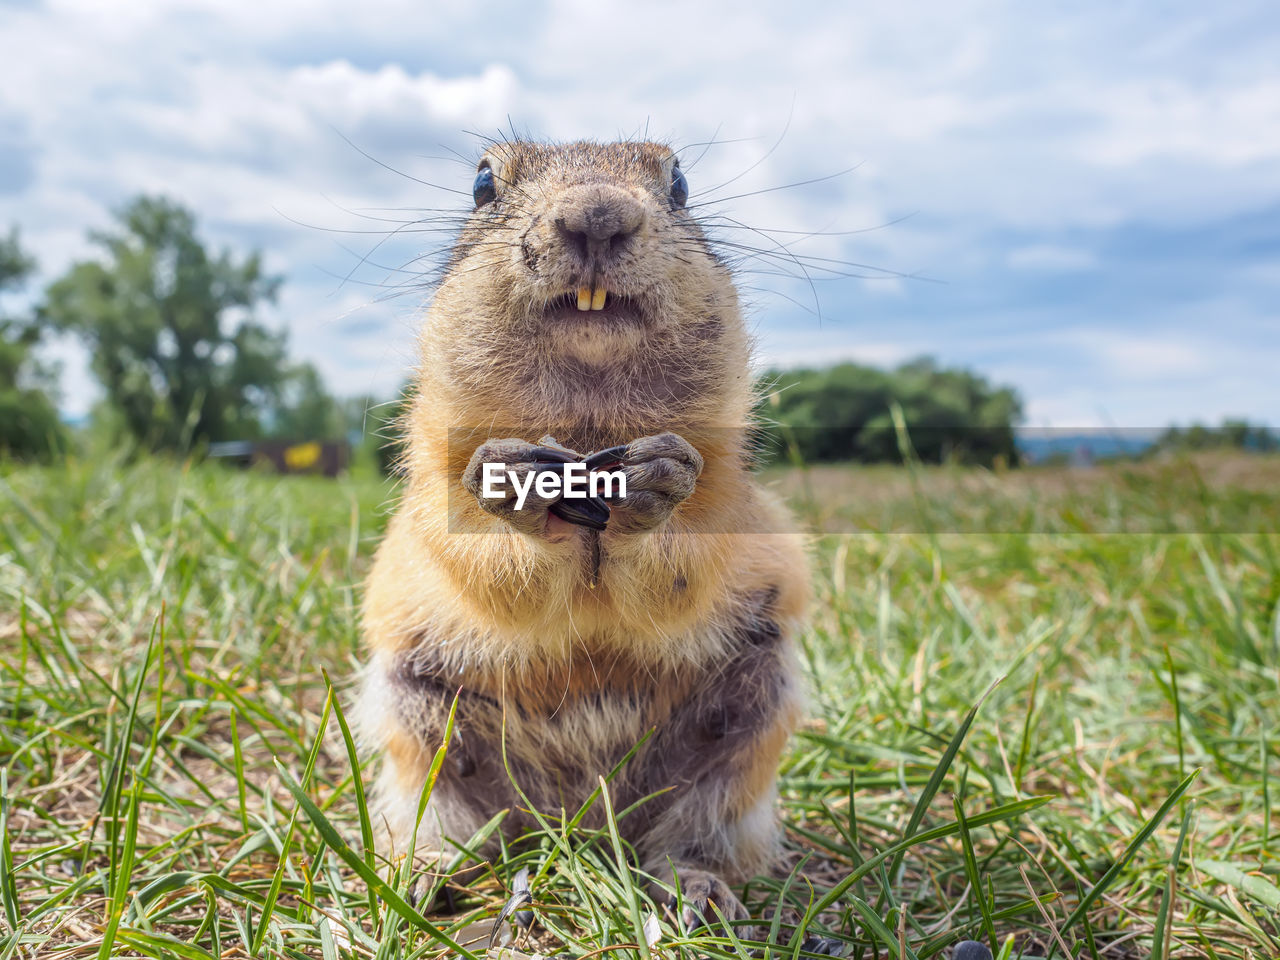 animal themes, animal, mammal, animal wildlife, one animal, grass, wildlife, nature, plant, prairie dog, portrait, no people, sky, looking at camera, cloud, outdoors, rodent, squirrel, day, front view, cute, pet, whiskers, land, focus on foreground